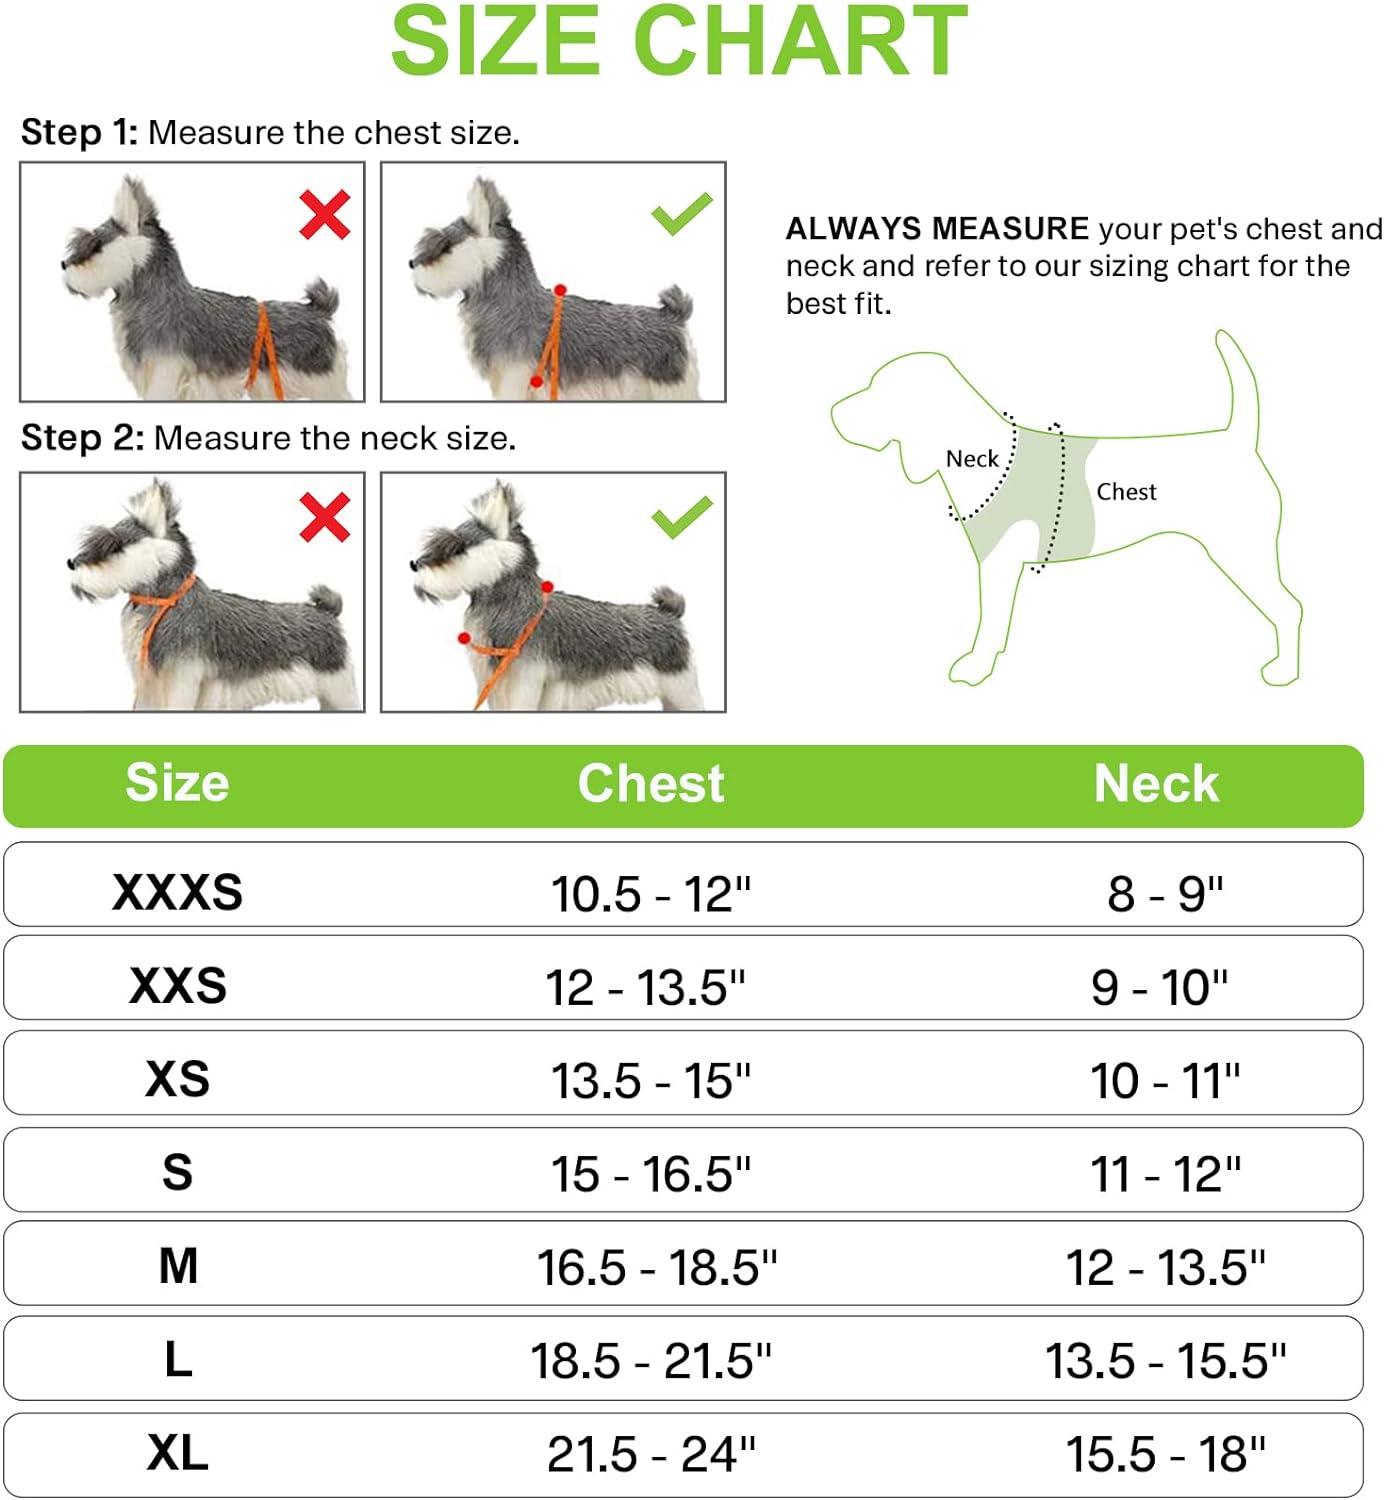 Joytale Step in Dog Harness,12 Colors,Breathable Mesh Vest Harness,Reflective Soft Padded Harnesses for Cats and Puppies Dogs,Green,XXXS